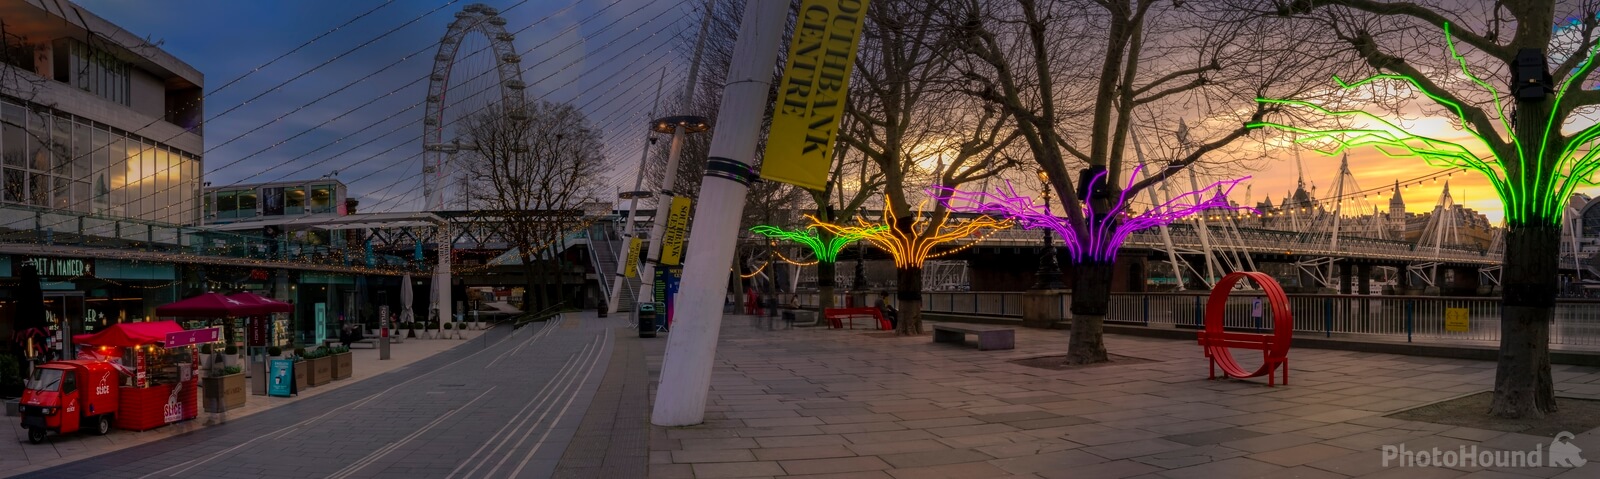 Image of South Bank by Doug Stratton